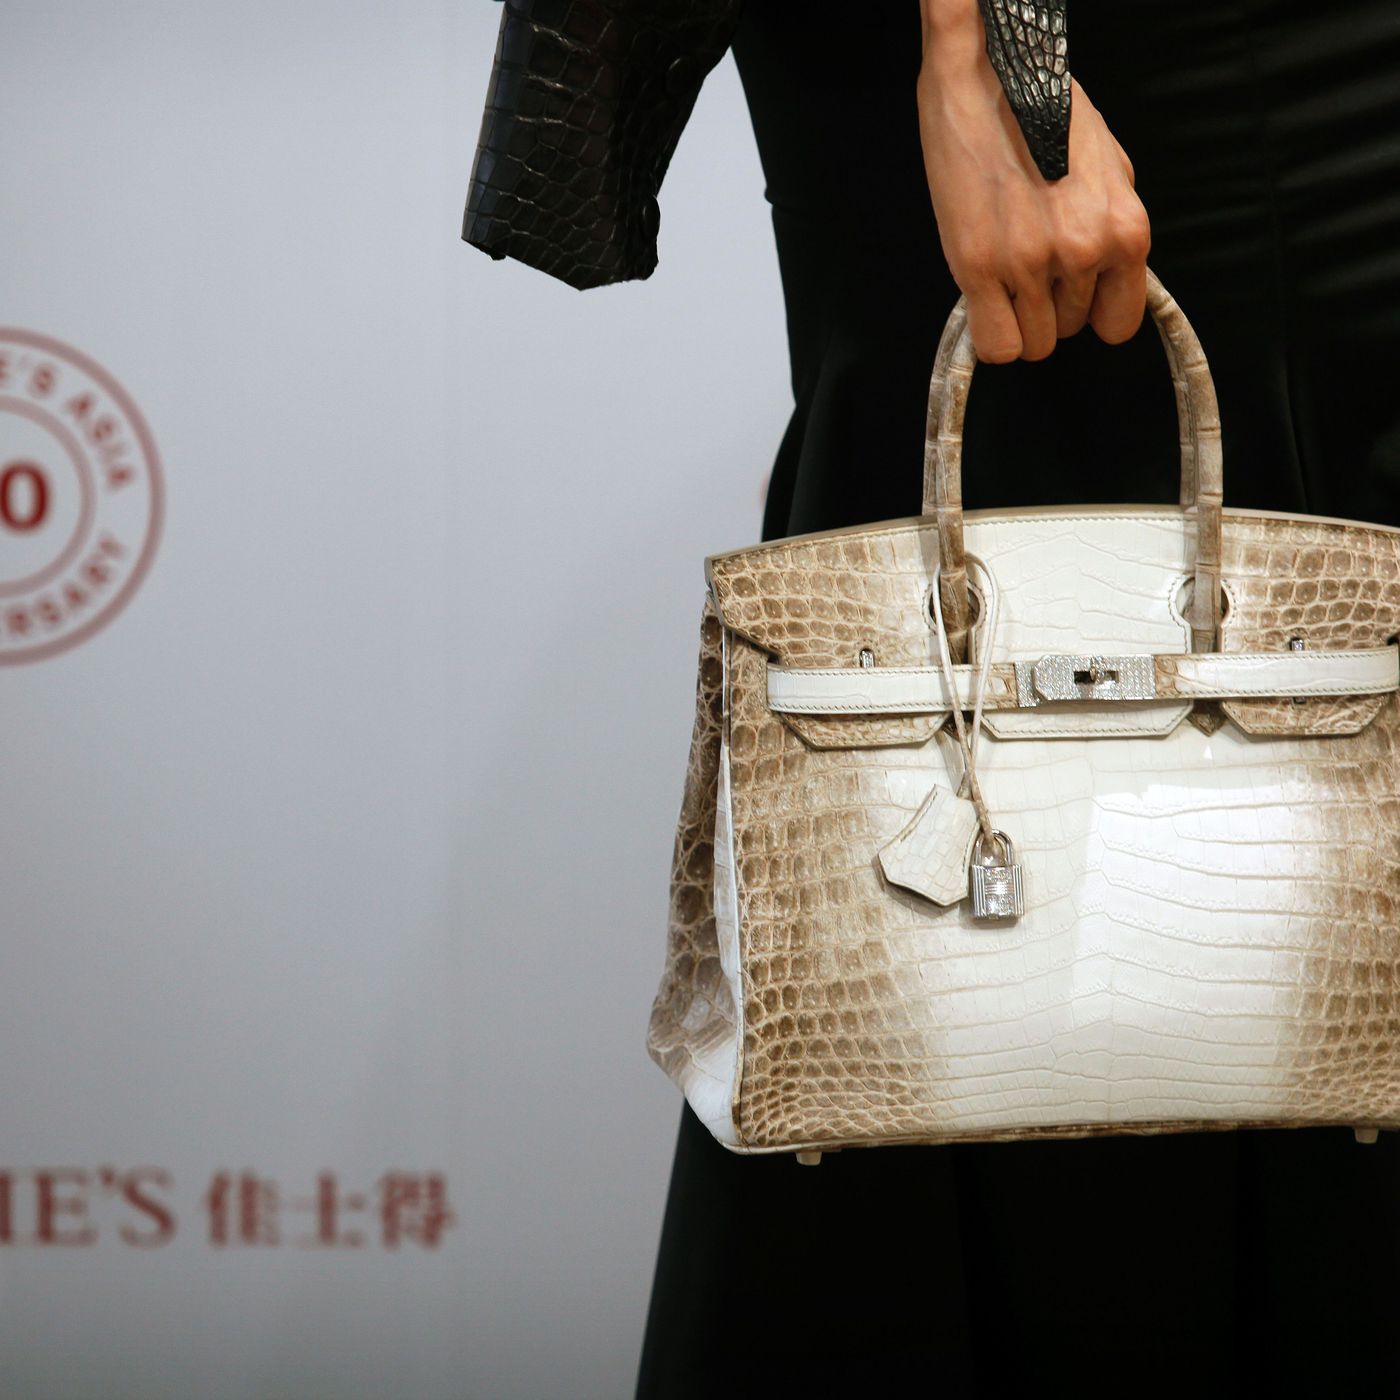 This $300,000 Birkin Bag Is the Most Expensive Bag Ever Auctioned